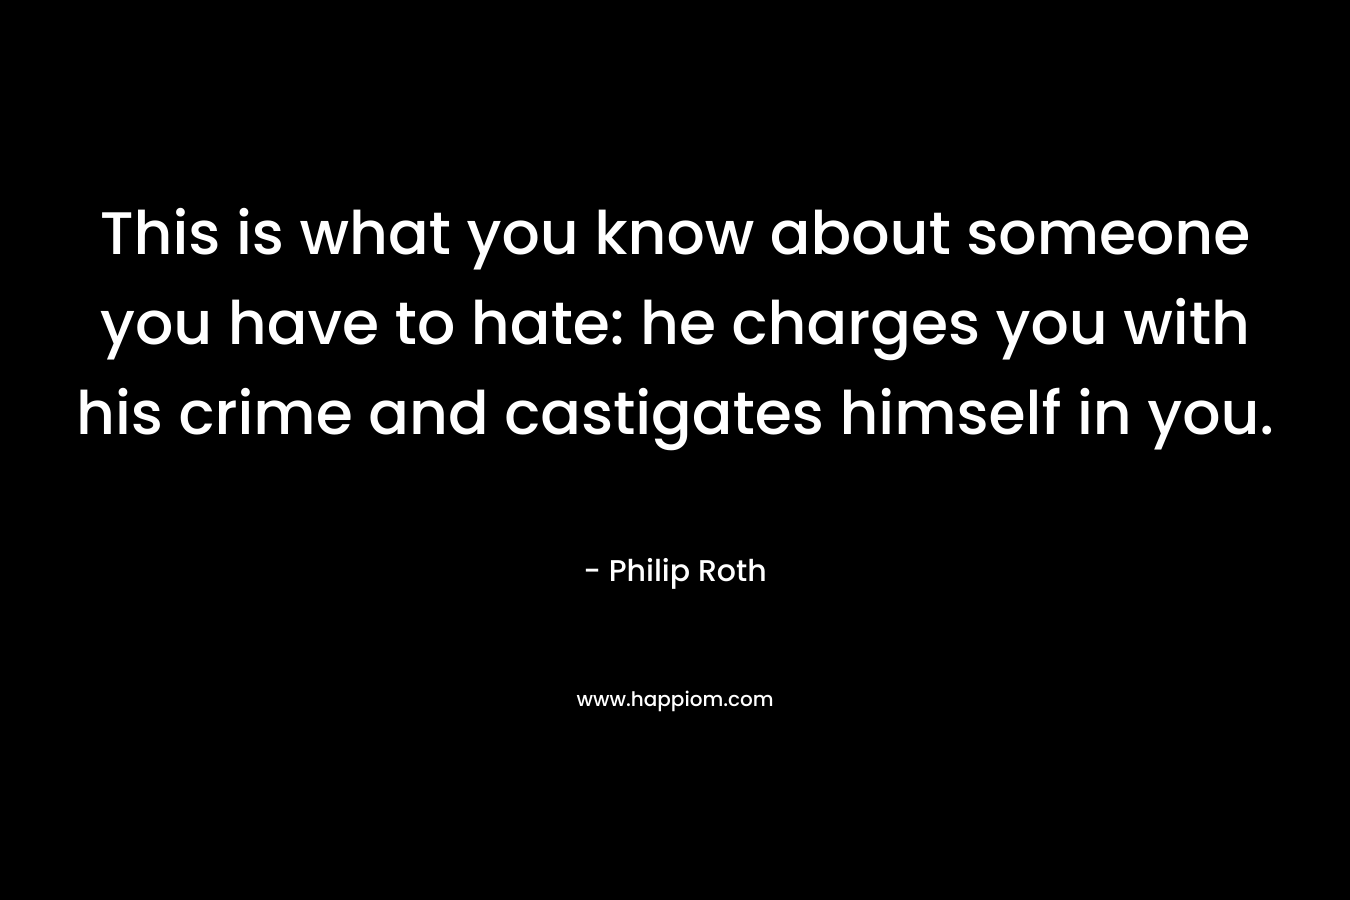 This is what you know about someone you have to hate: he charges you with his crime and castigates himself in you. – Philip Roth